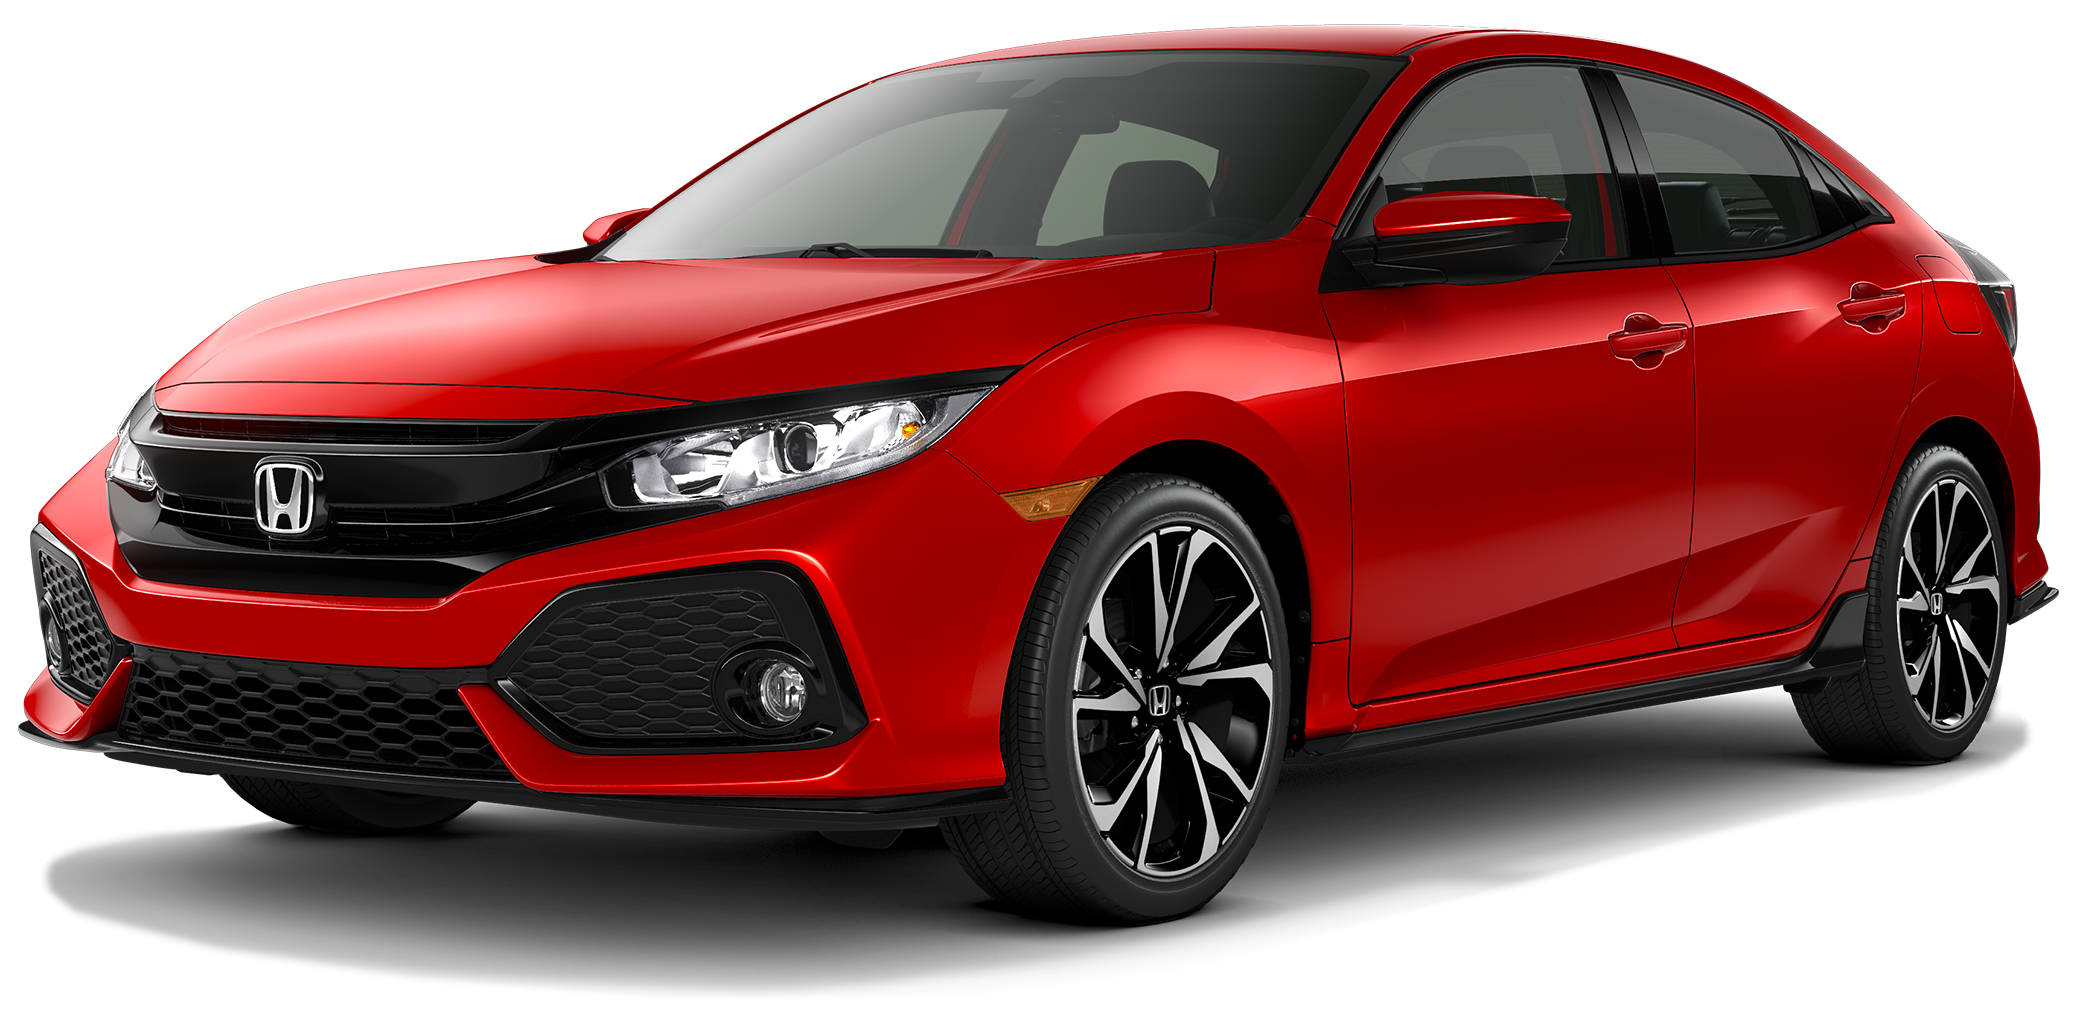 2019 Honda Civic Incentives, Specials & Offers in Tipp City OH